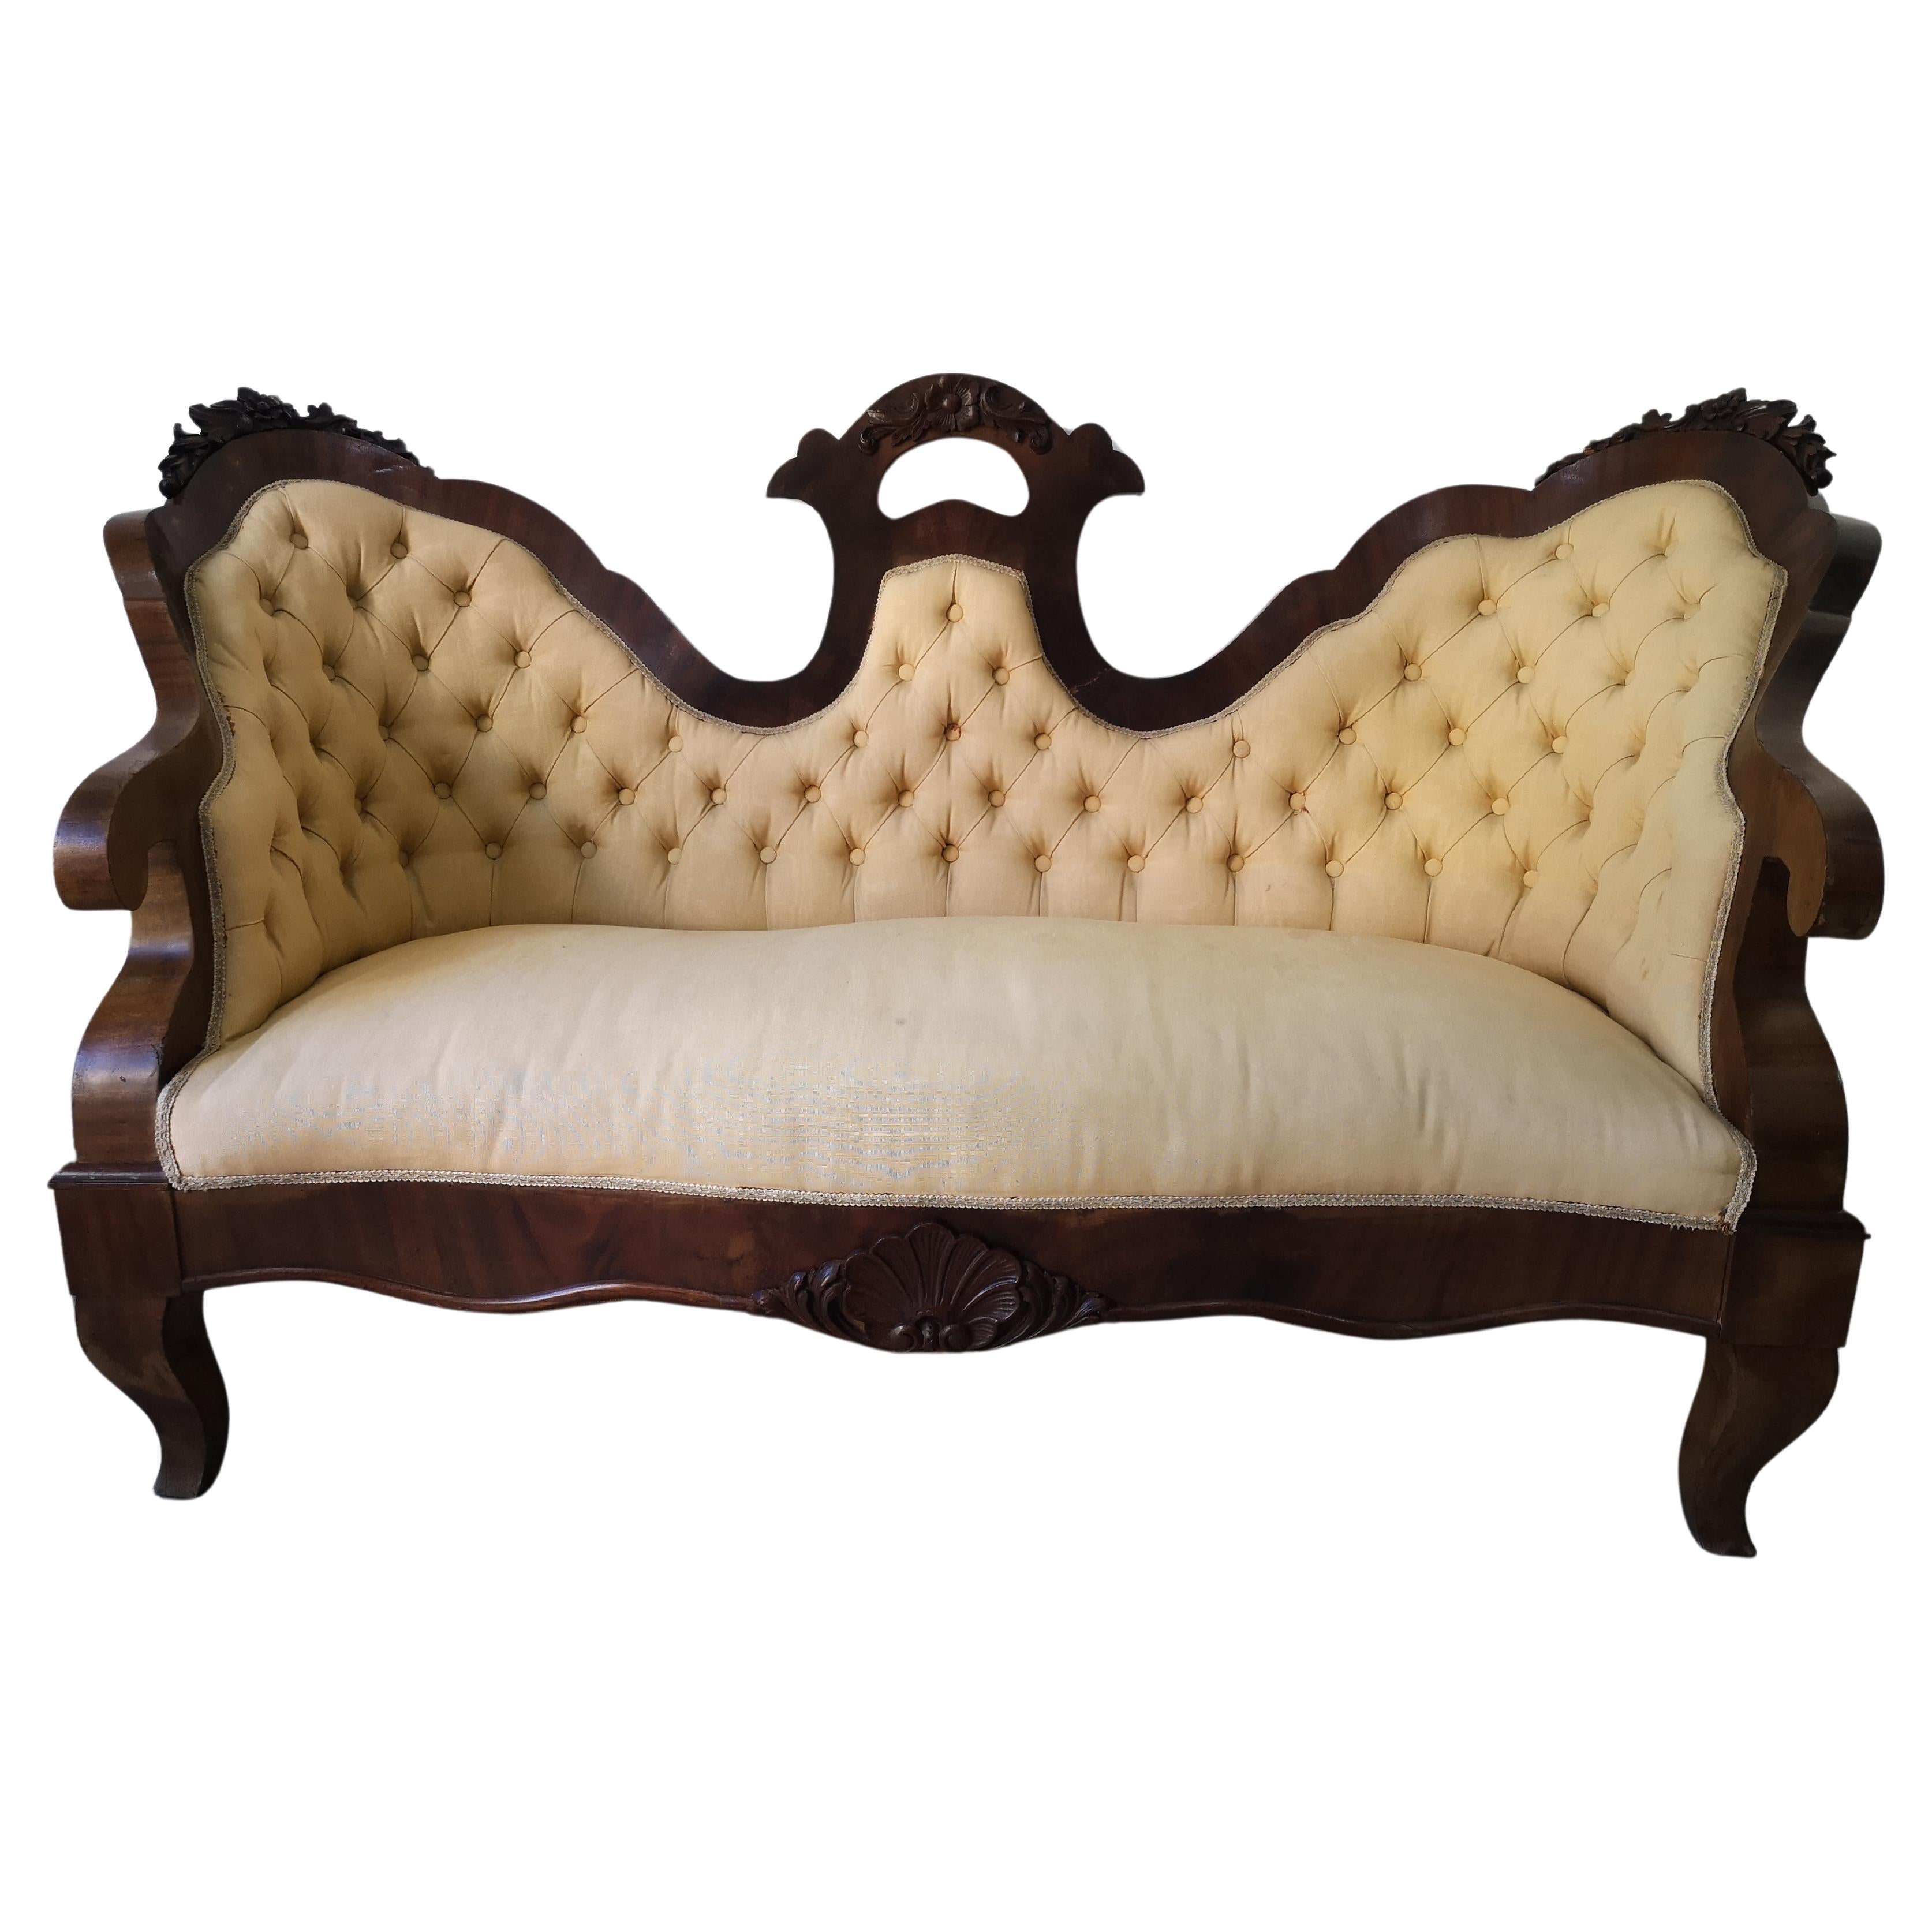 Two-seater Louis Philippe sofa in walnut and fabric, 19th century era